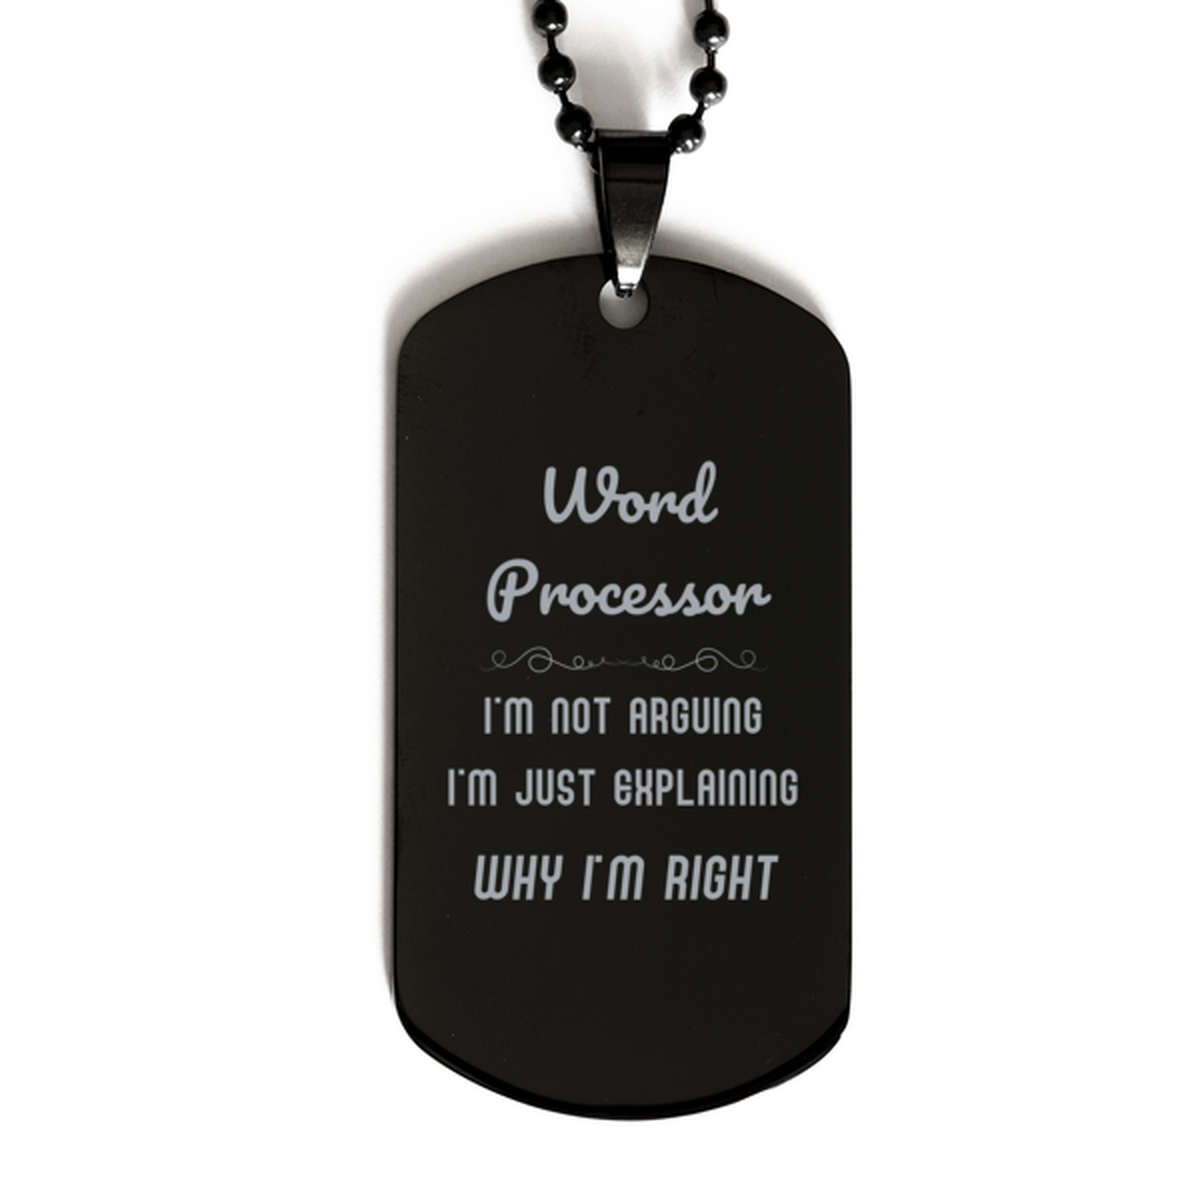 Word Processor I'm not Arguing. I'm Just Explaining Why I'm RIGHT Black Dog Tag, Funny Saying Quote Word Processor Gifts For Word Processor Graduation Birthday Christmas Gifts for Men Women Coworker